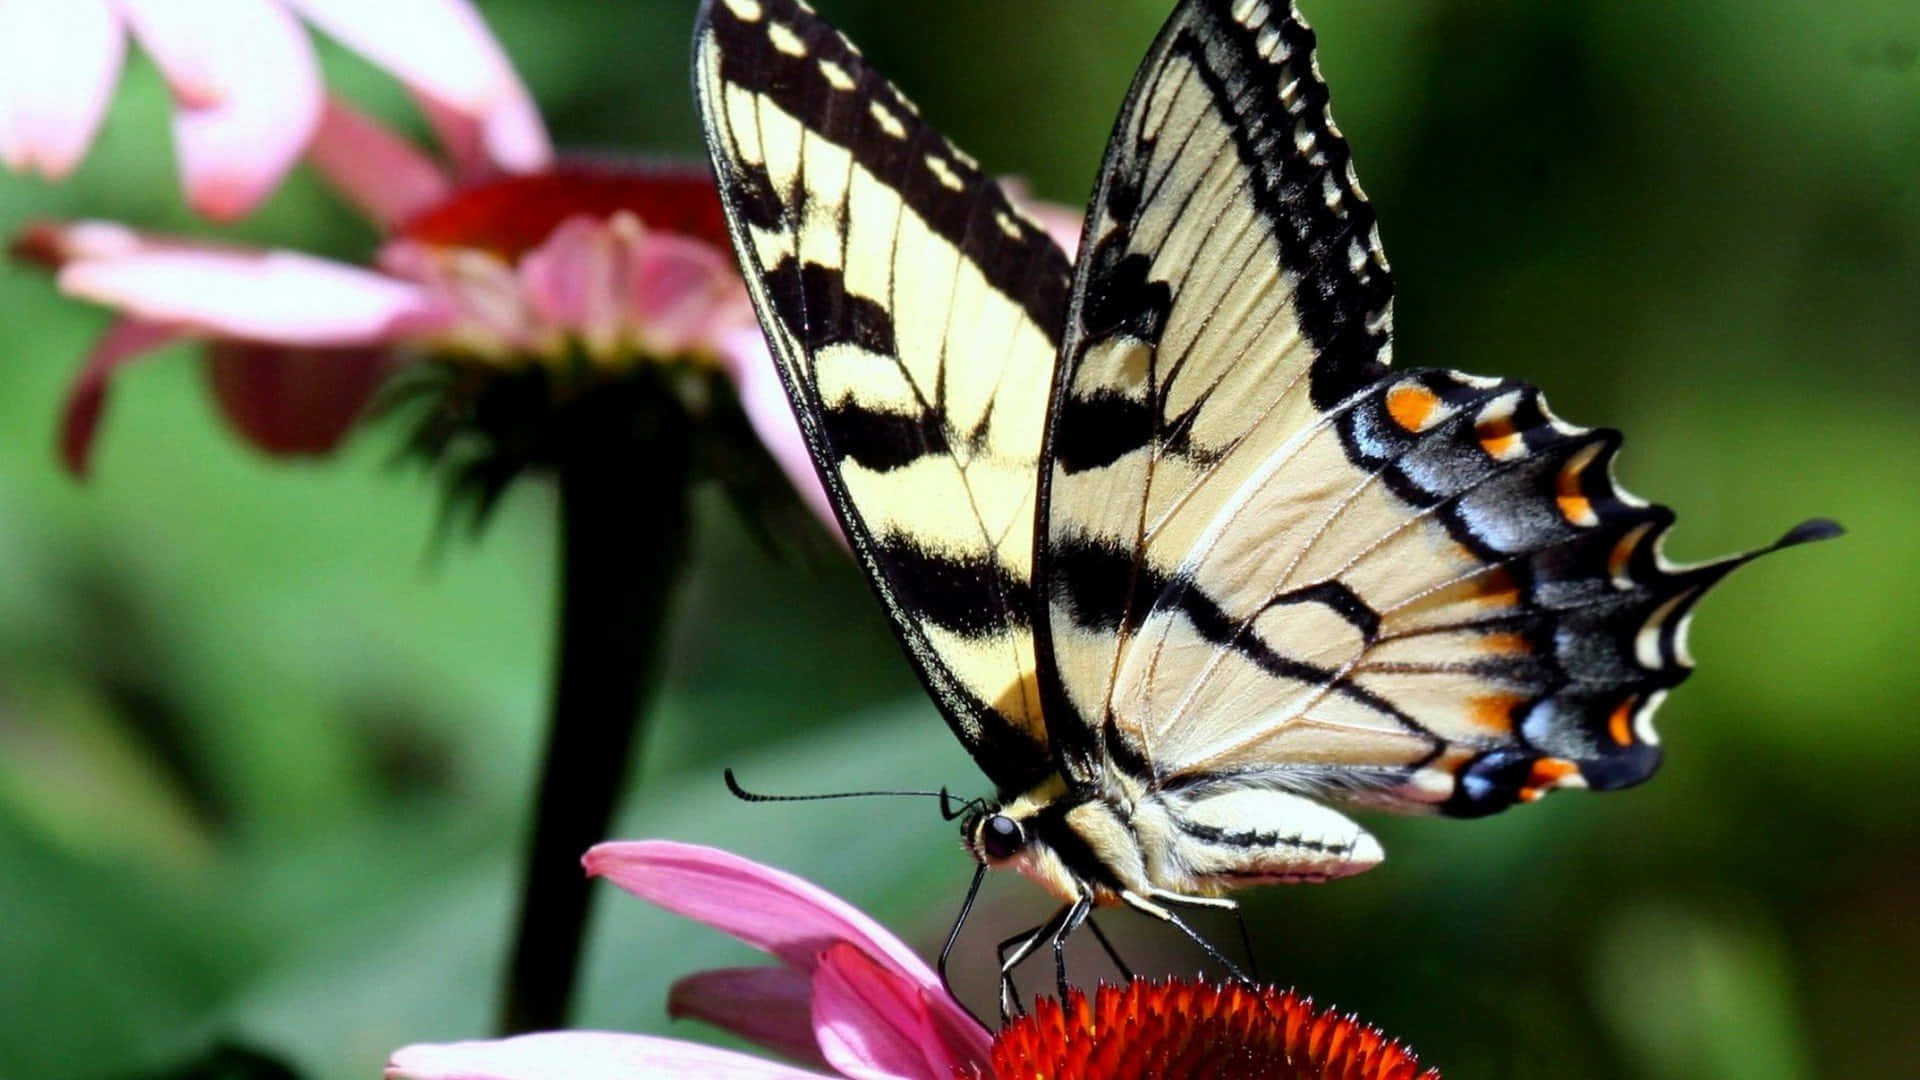 "Emerging From A Cocoon into a Beautiful Butterfly" Wallpaper